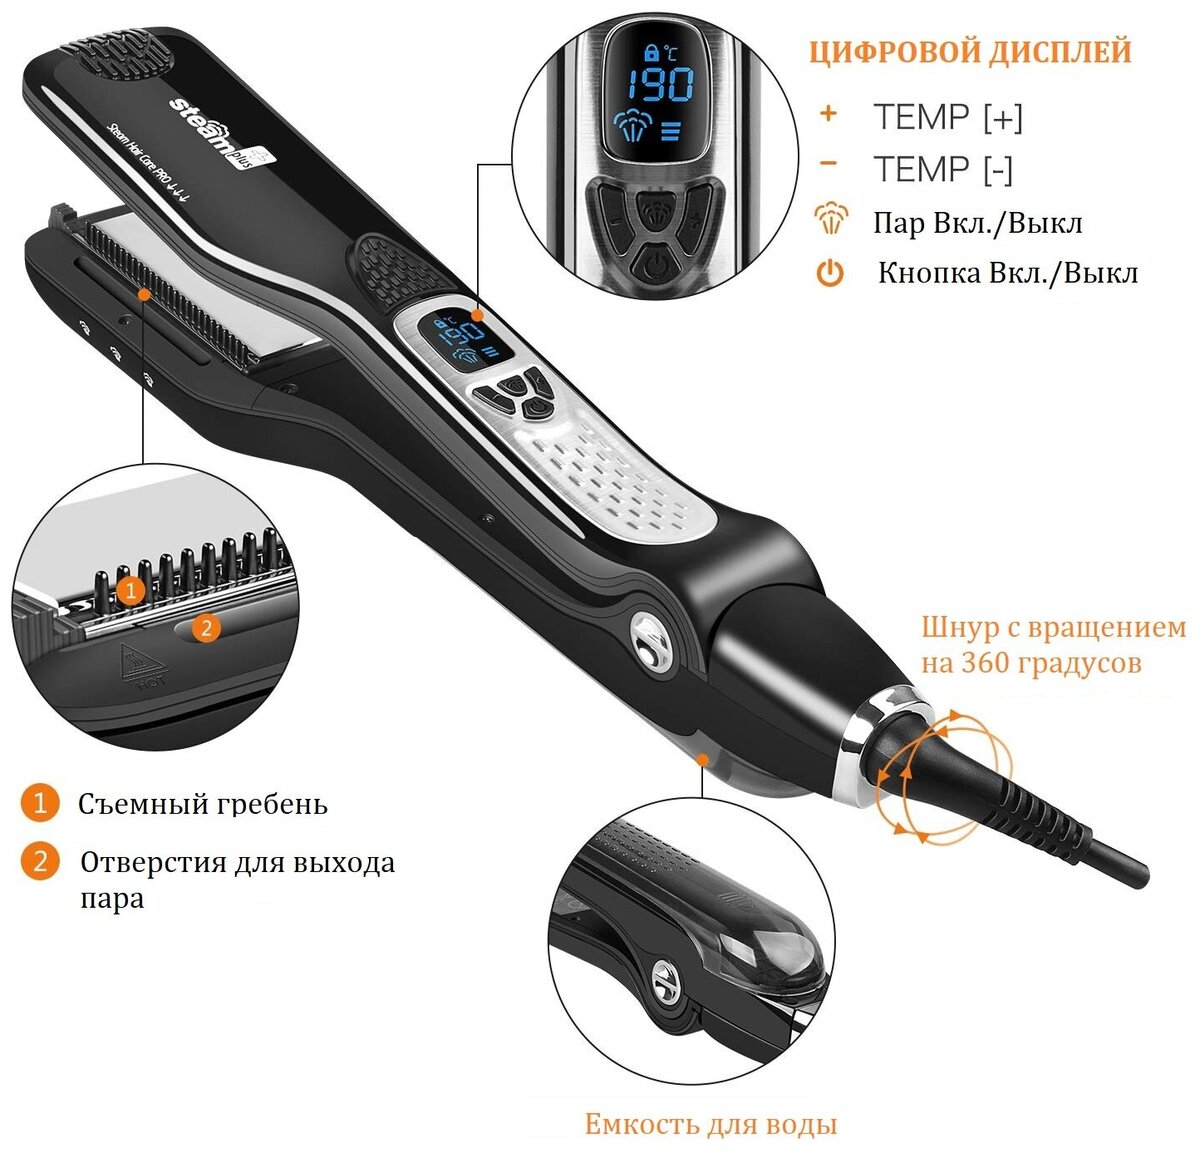 Hair straightener with steam фото 65